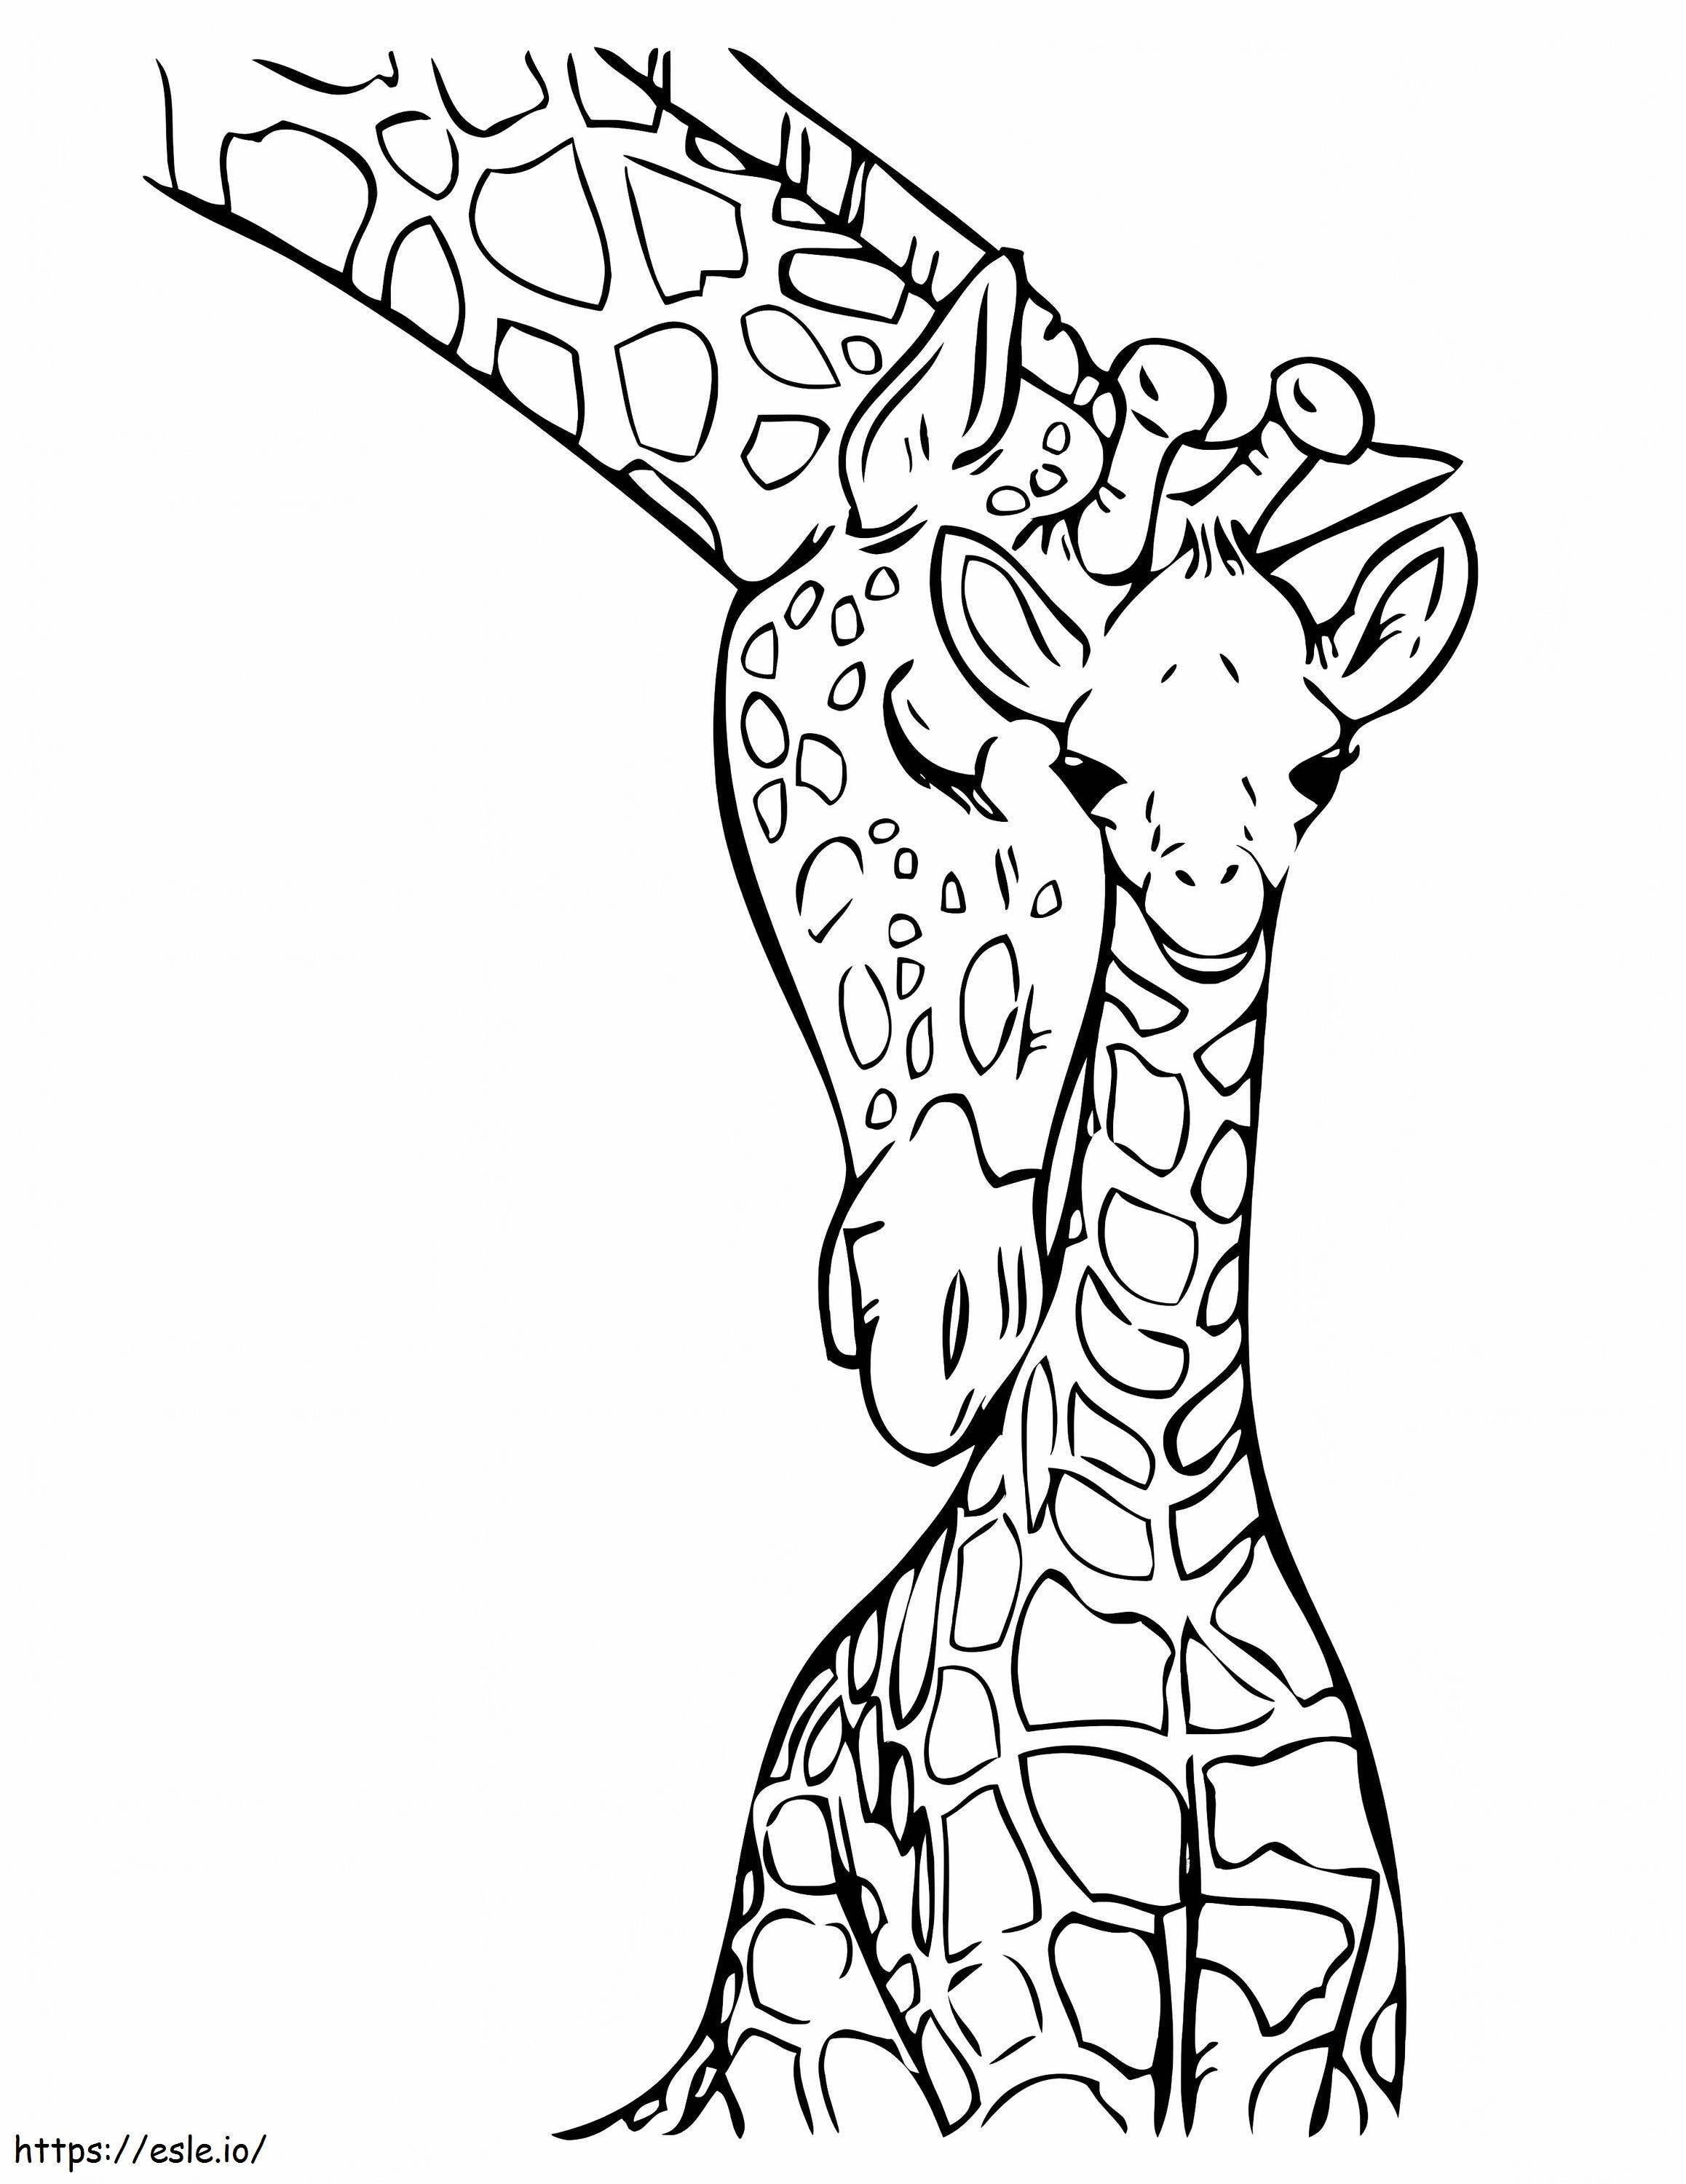 Cute Giraffe Two coloring page